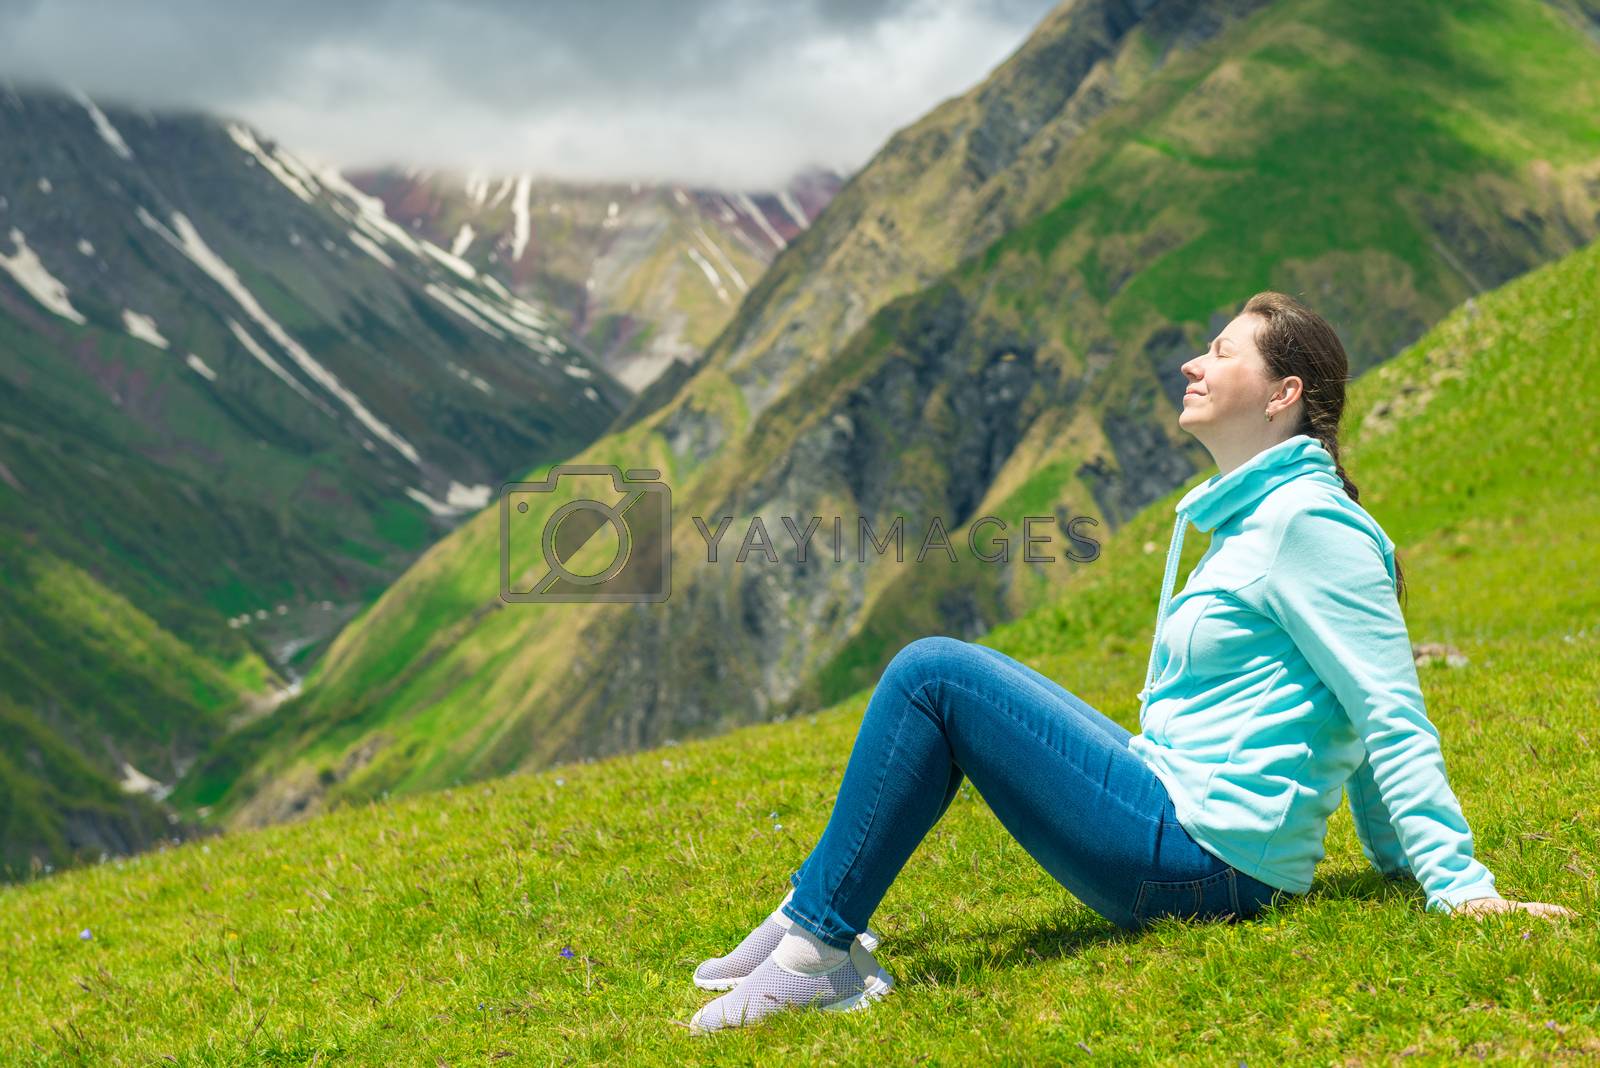 Royalty free image of Happy woman resting and admiring the mountains in the campaign t by kosmsos111